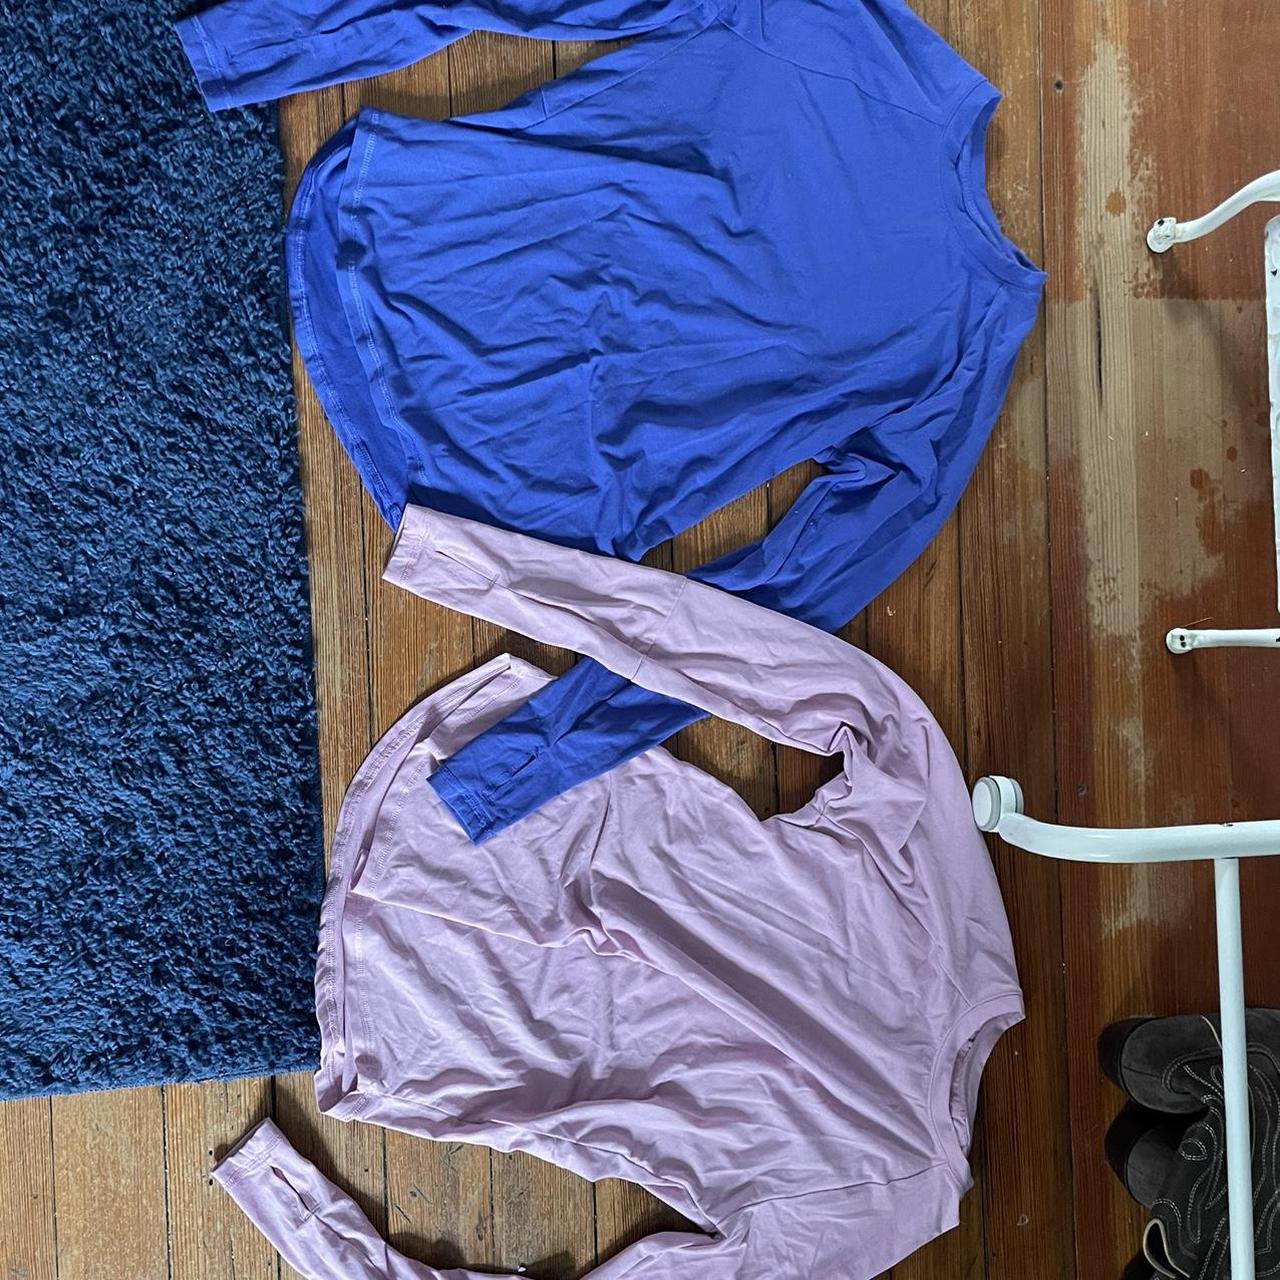 Blue & Pink Longsleeve Workout Tops, Selling as a